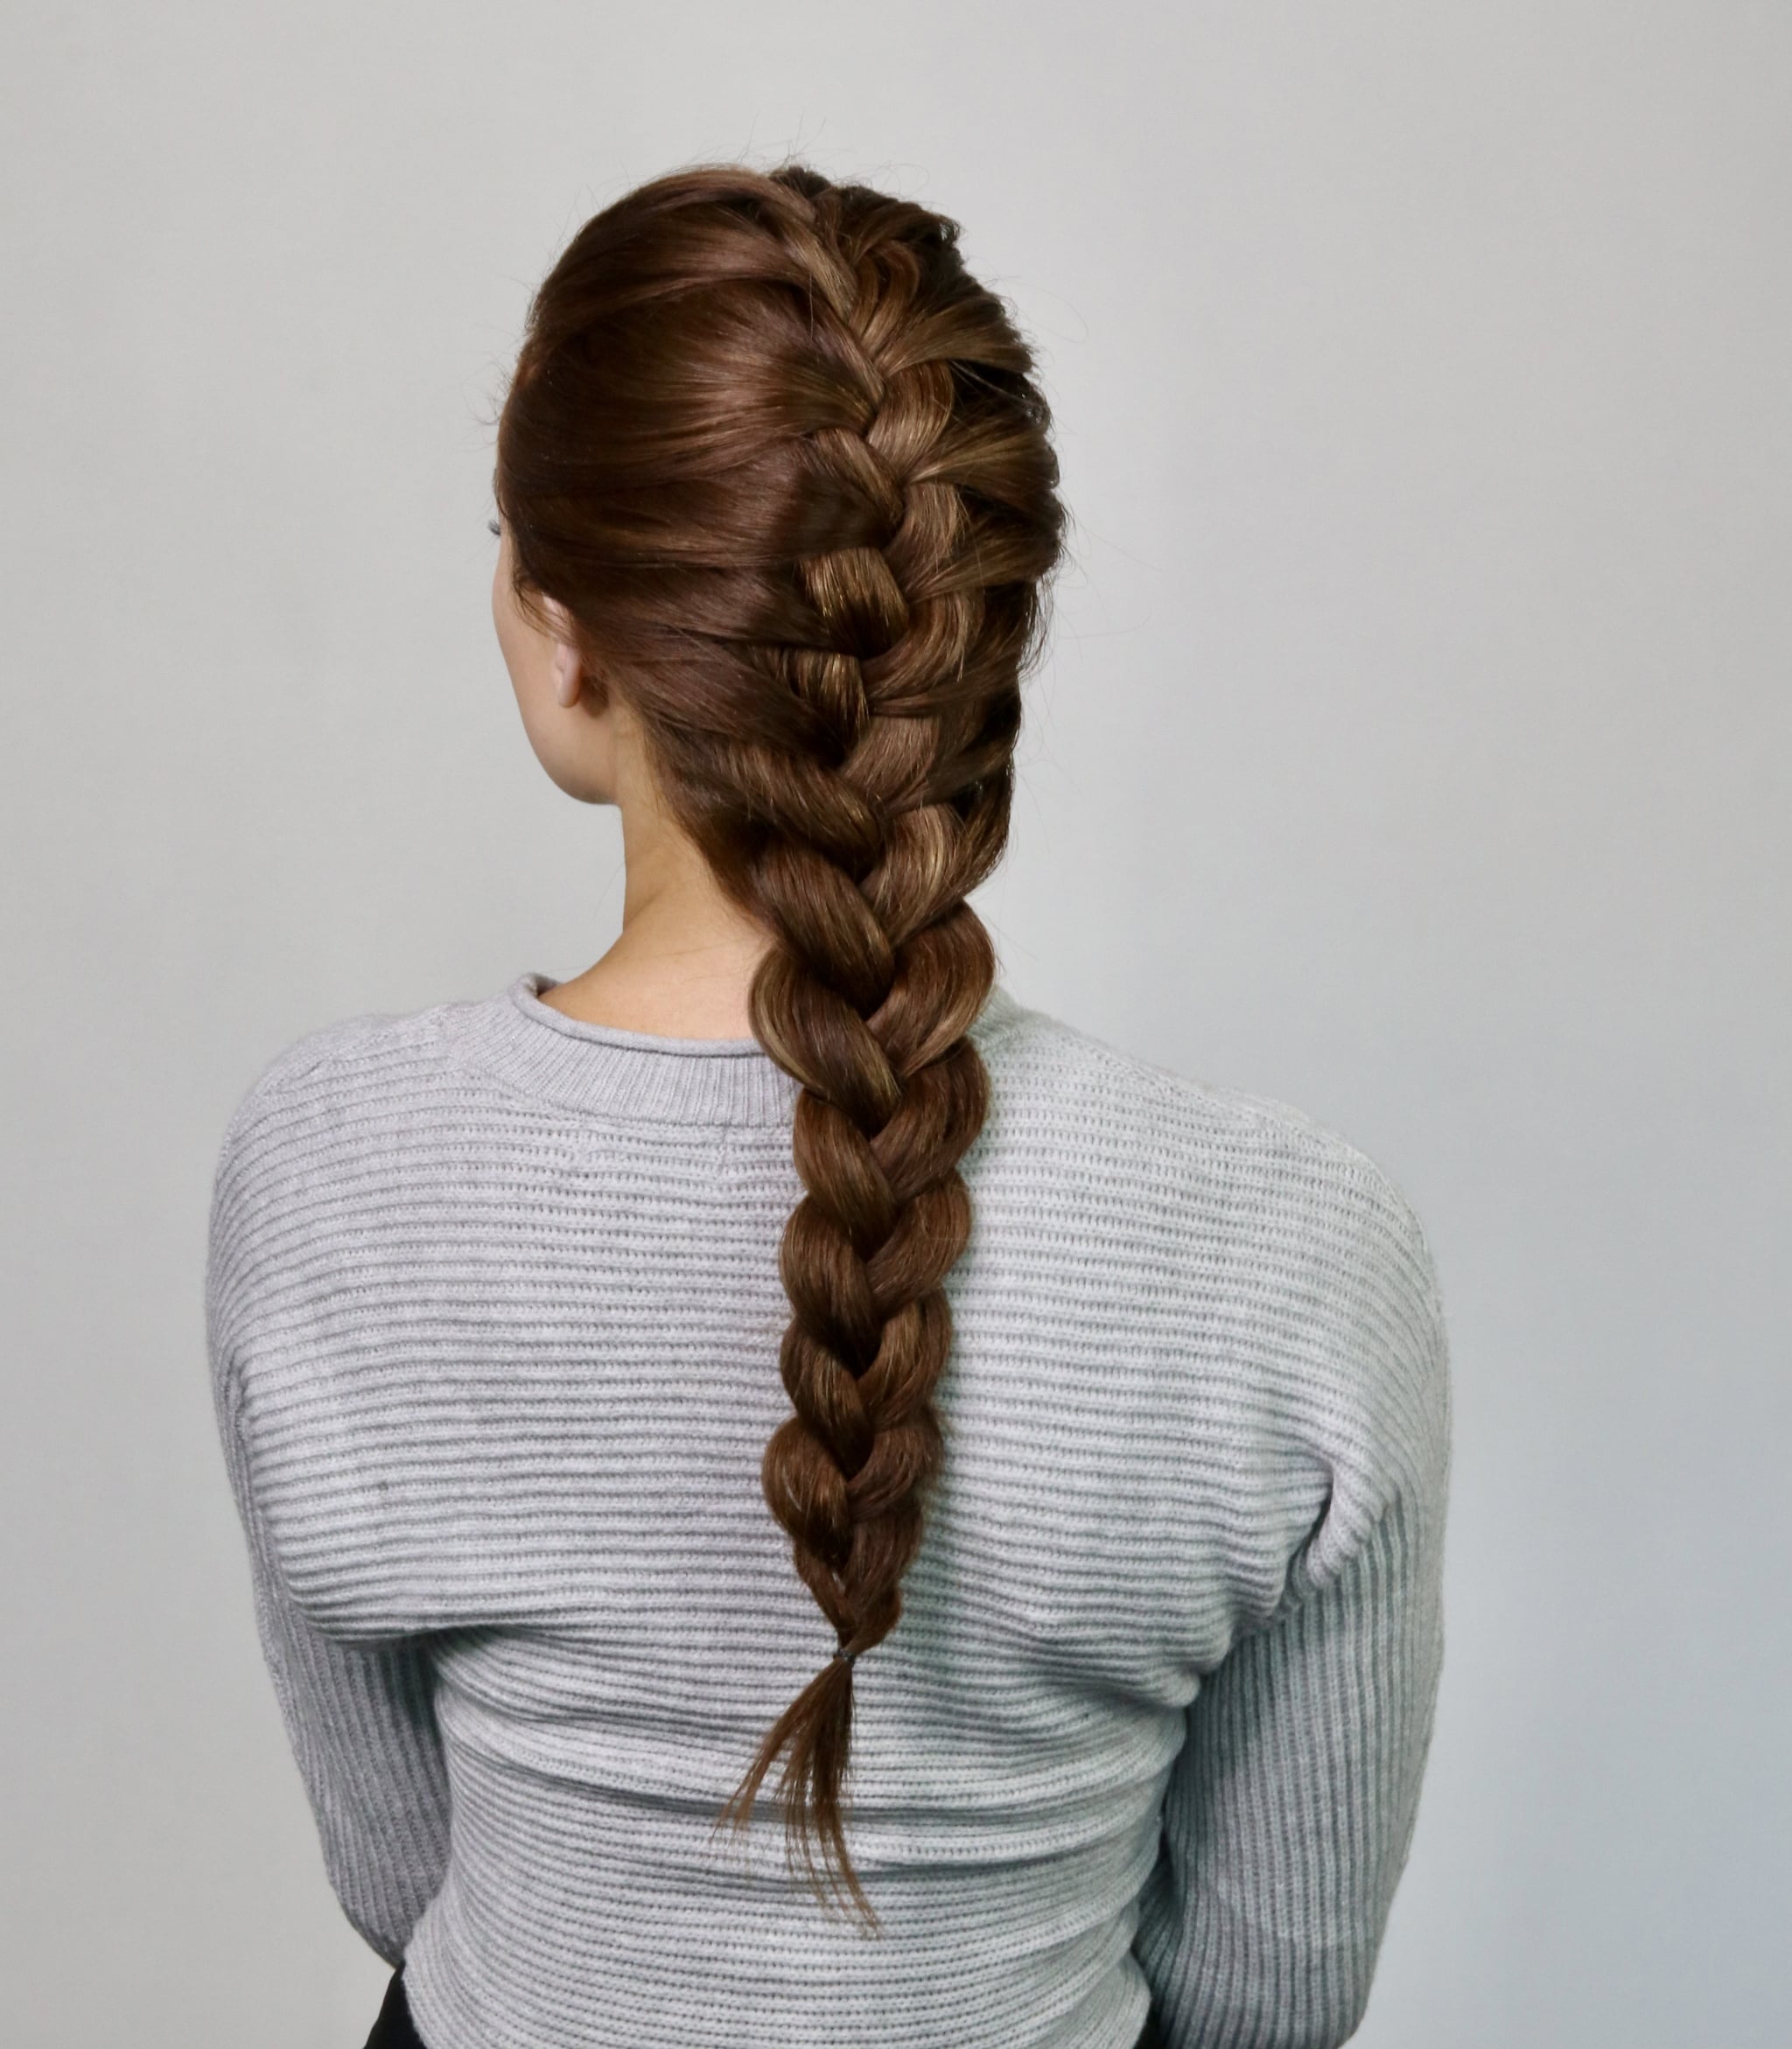 How to French Braid Your Hair: Step-by-Step Photo Tutorial